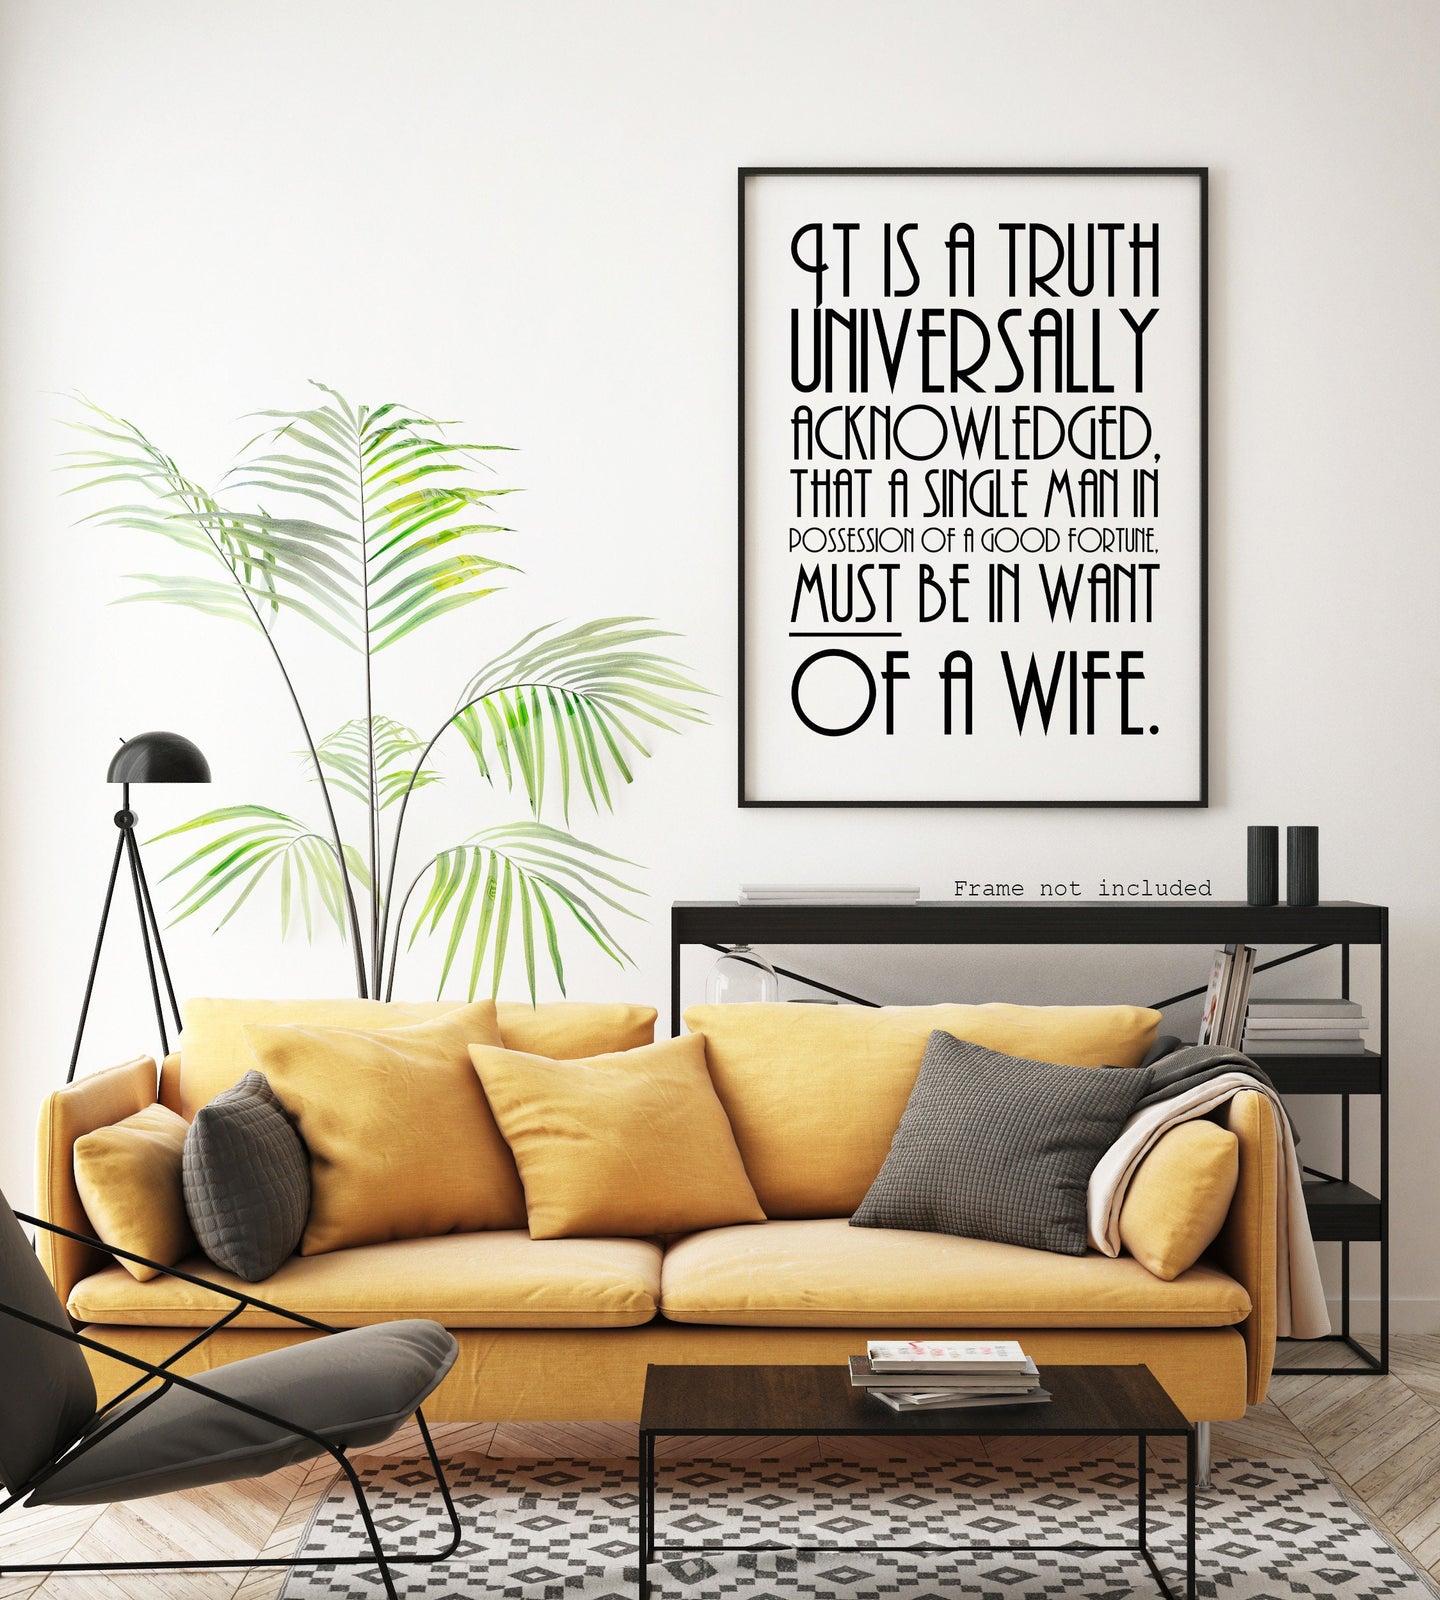 Pride and Prejudice Opening Line - Jane Austen Quote - It is a truth universally acknowledged - UNFRAMED print